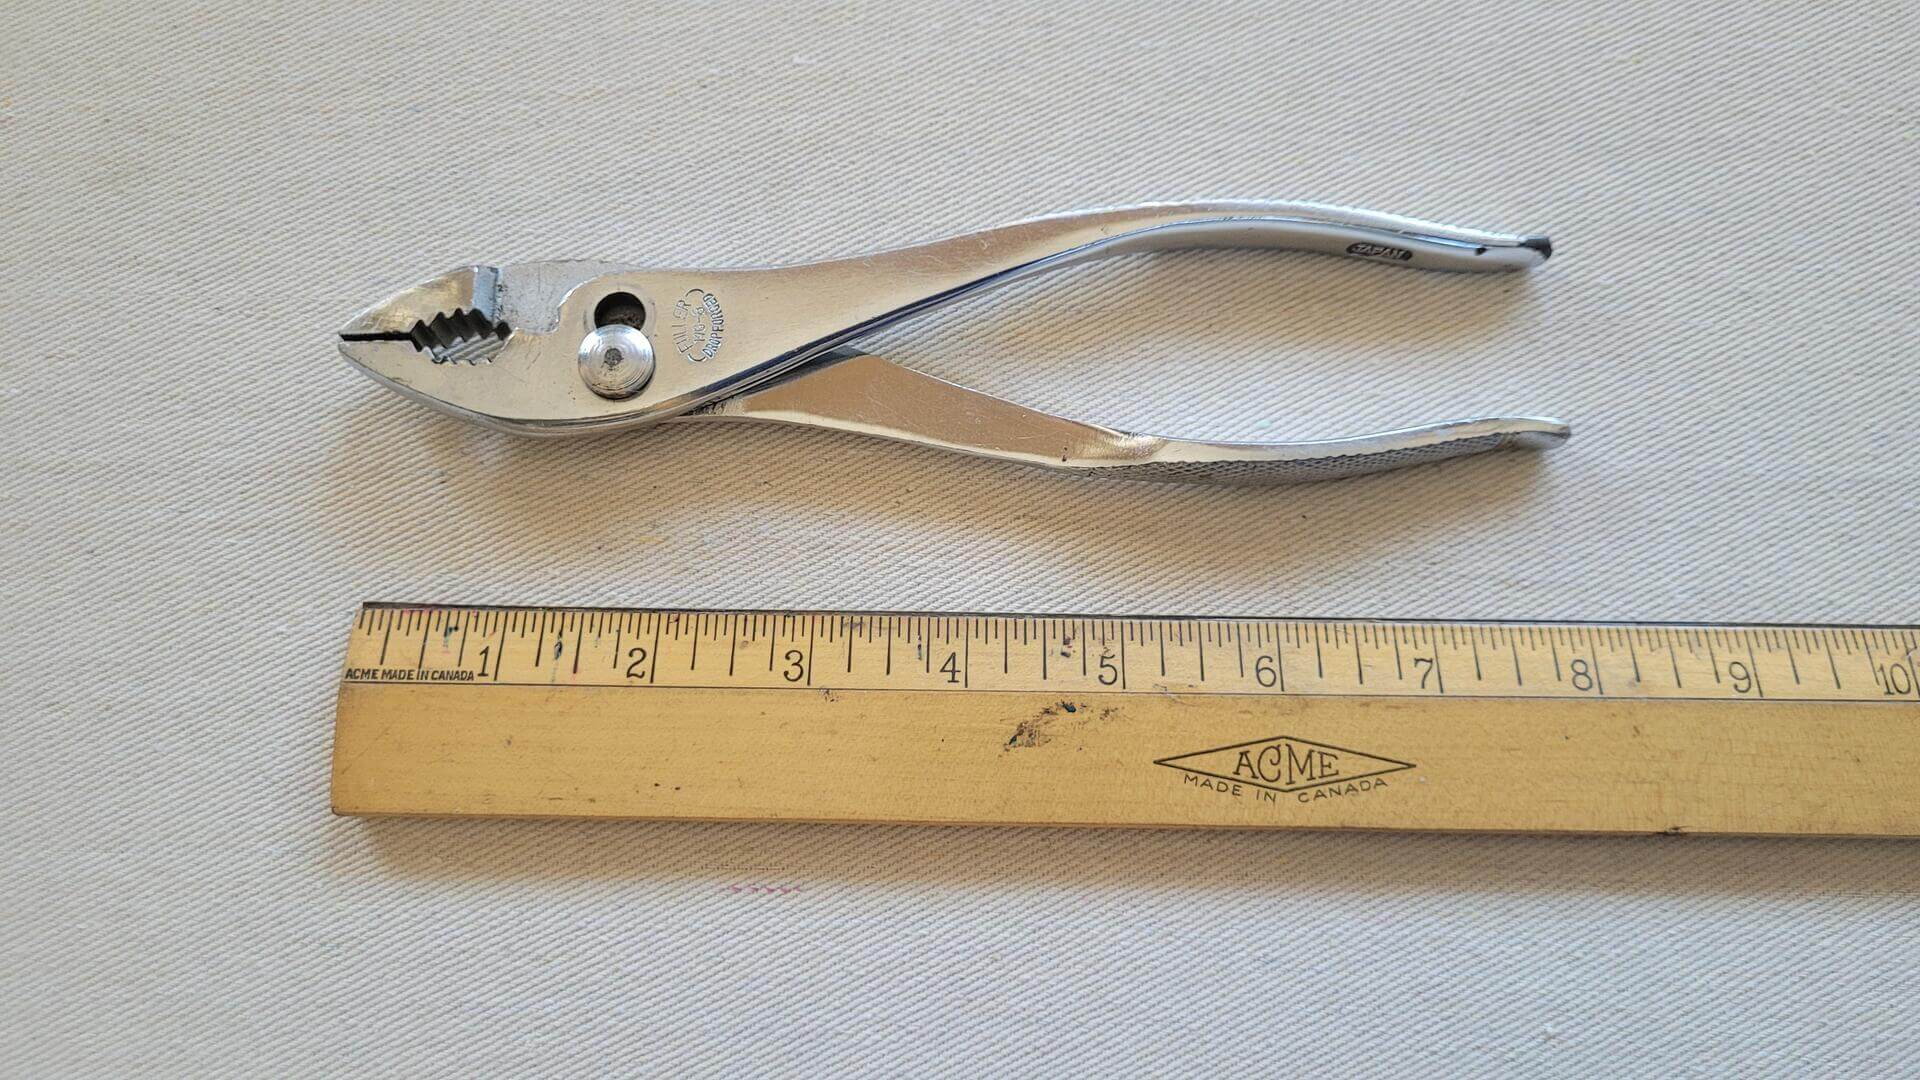 Pair of Fuller 196-8 drop forged slip joint pliers 8 inches with knurled grips. vintage made in Japan collectible automotive tools